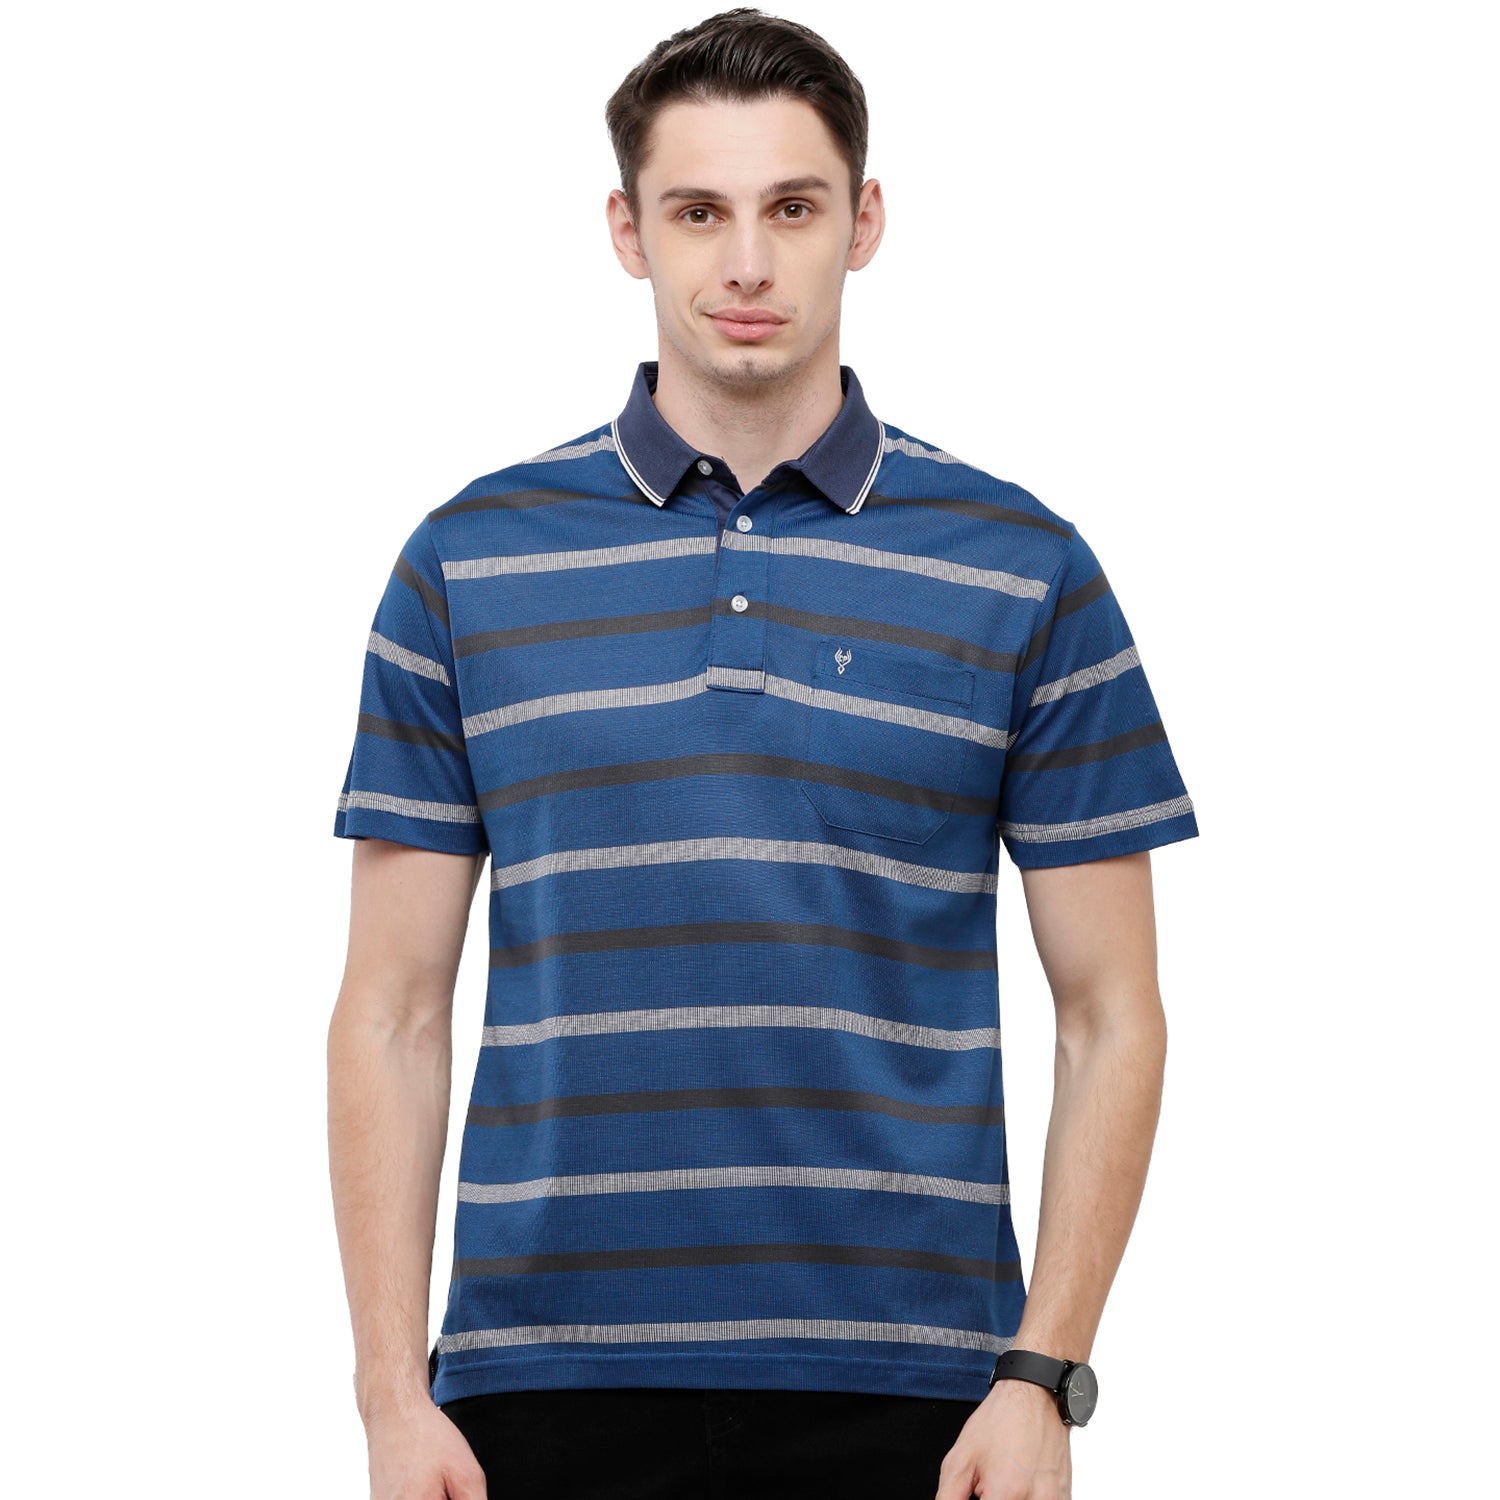 Classic Polo Men's Striped Authentic Fit Half Sleeve Premium Blue Stripe T-Shirt - Ultimo - 262 A T-shirt Classic Polo 